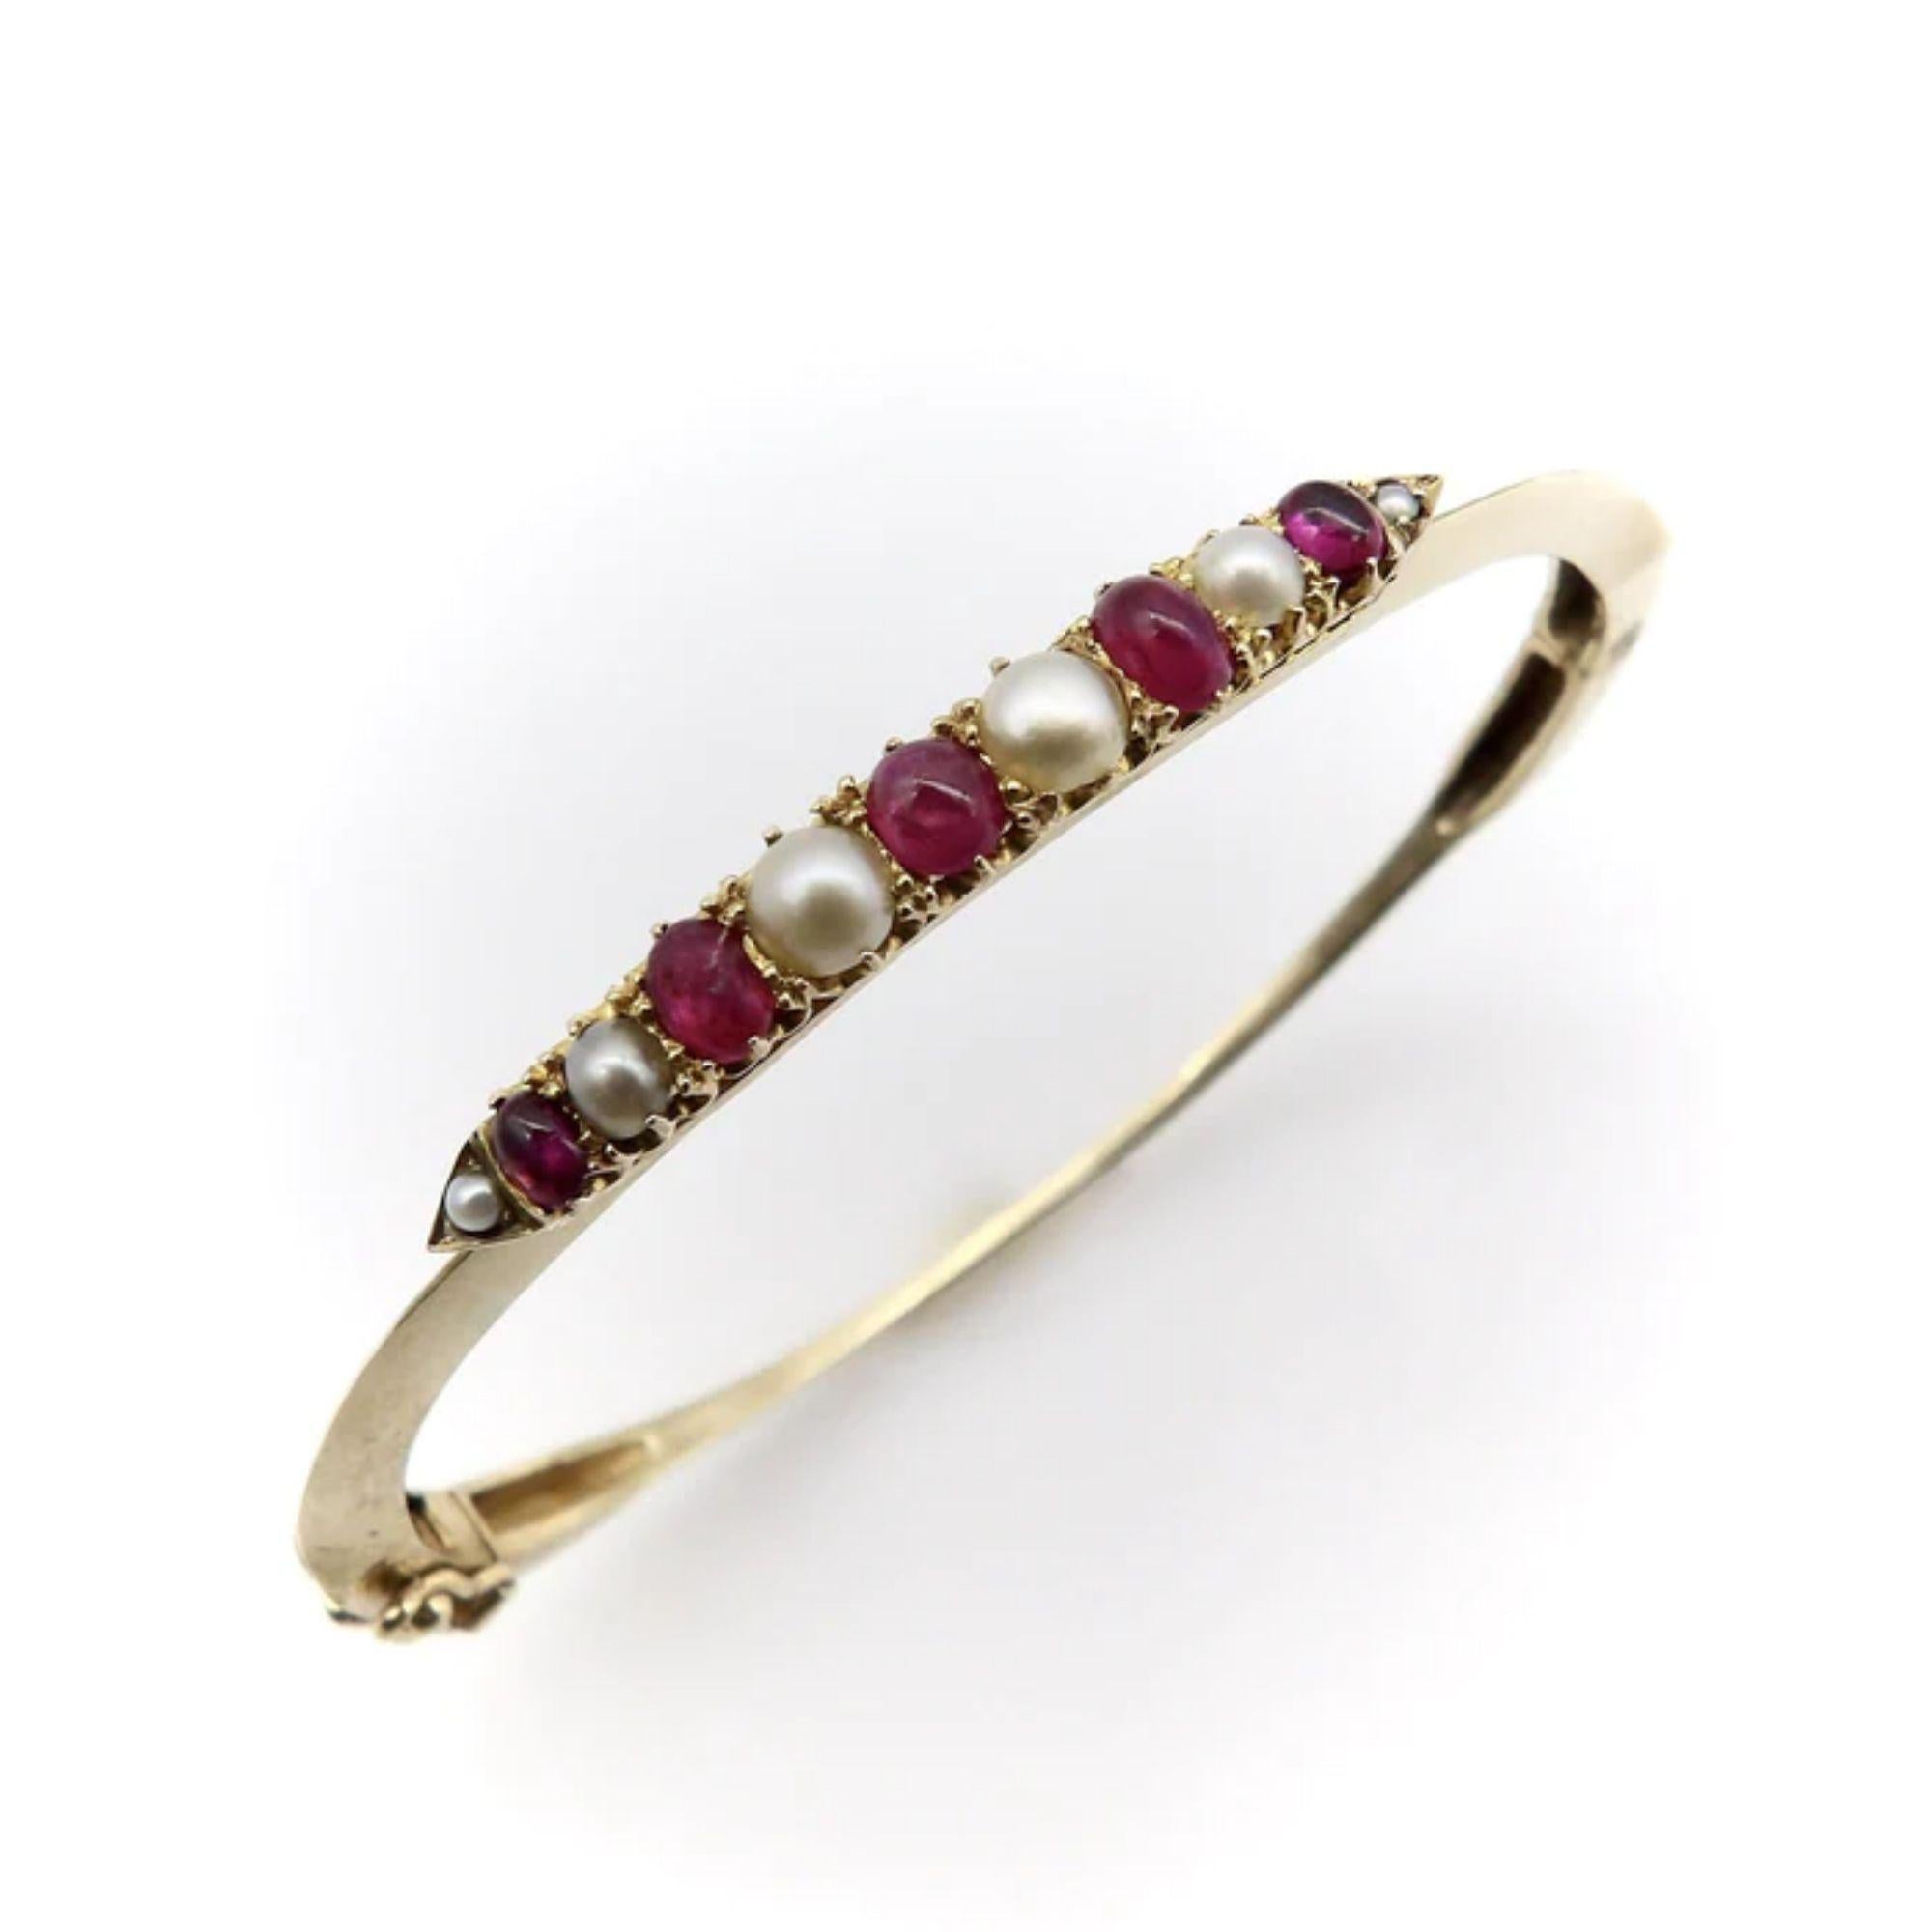 The centerpiece of this charming bracelet was most likely once a brooch, converted at some point into a stylish bangle. It contains six round half pearls and five oval-shaped cabochon rubies, prong-set into an alternating pattern, that has been